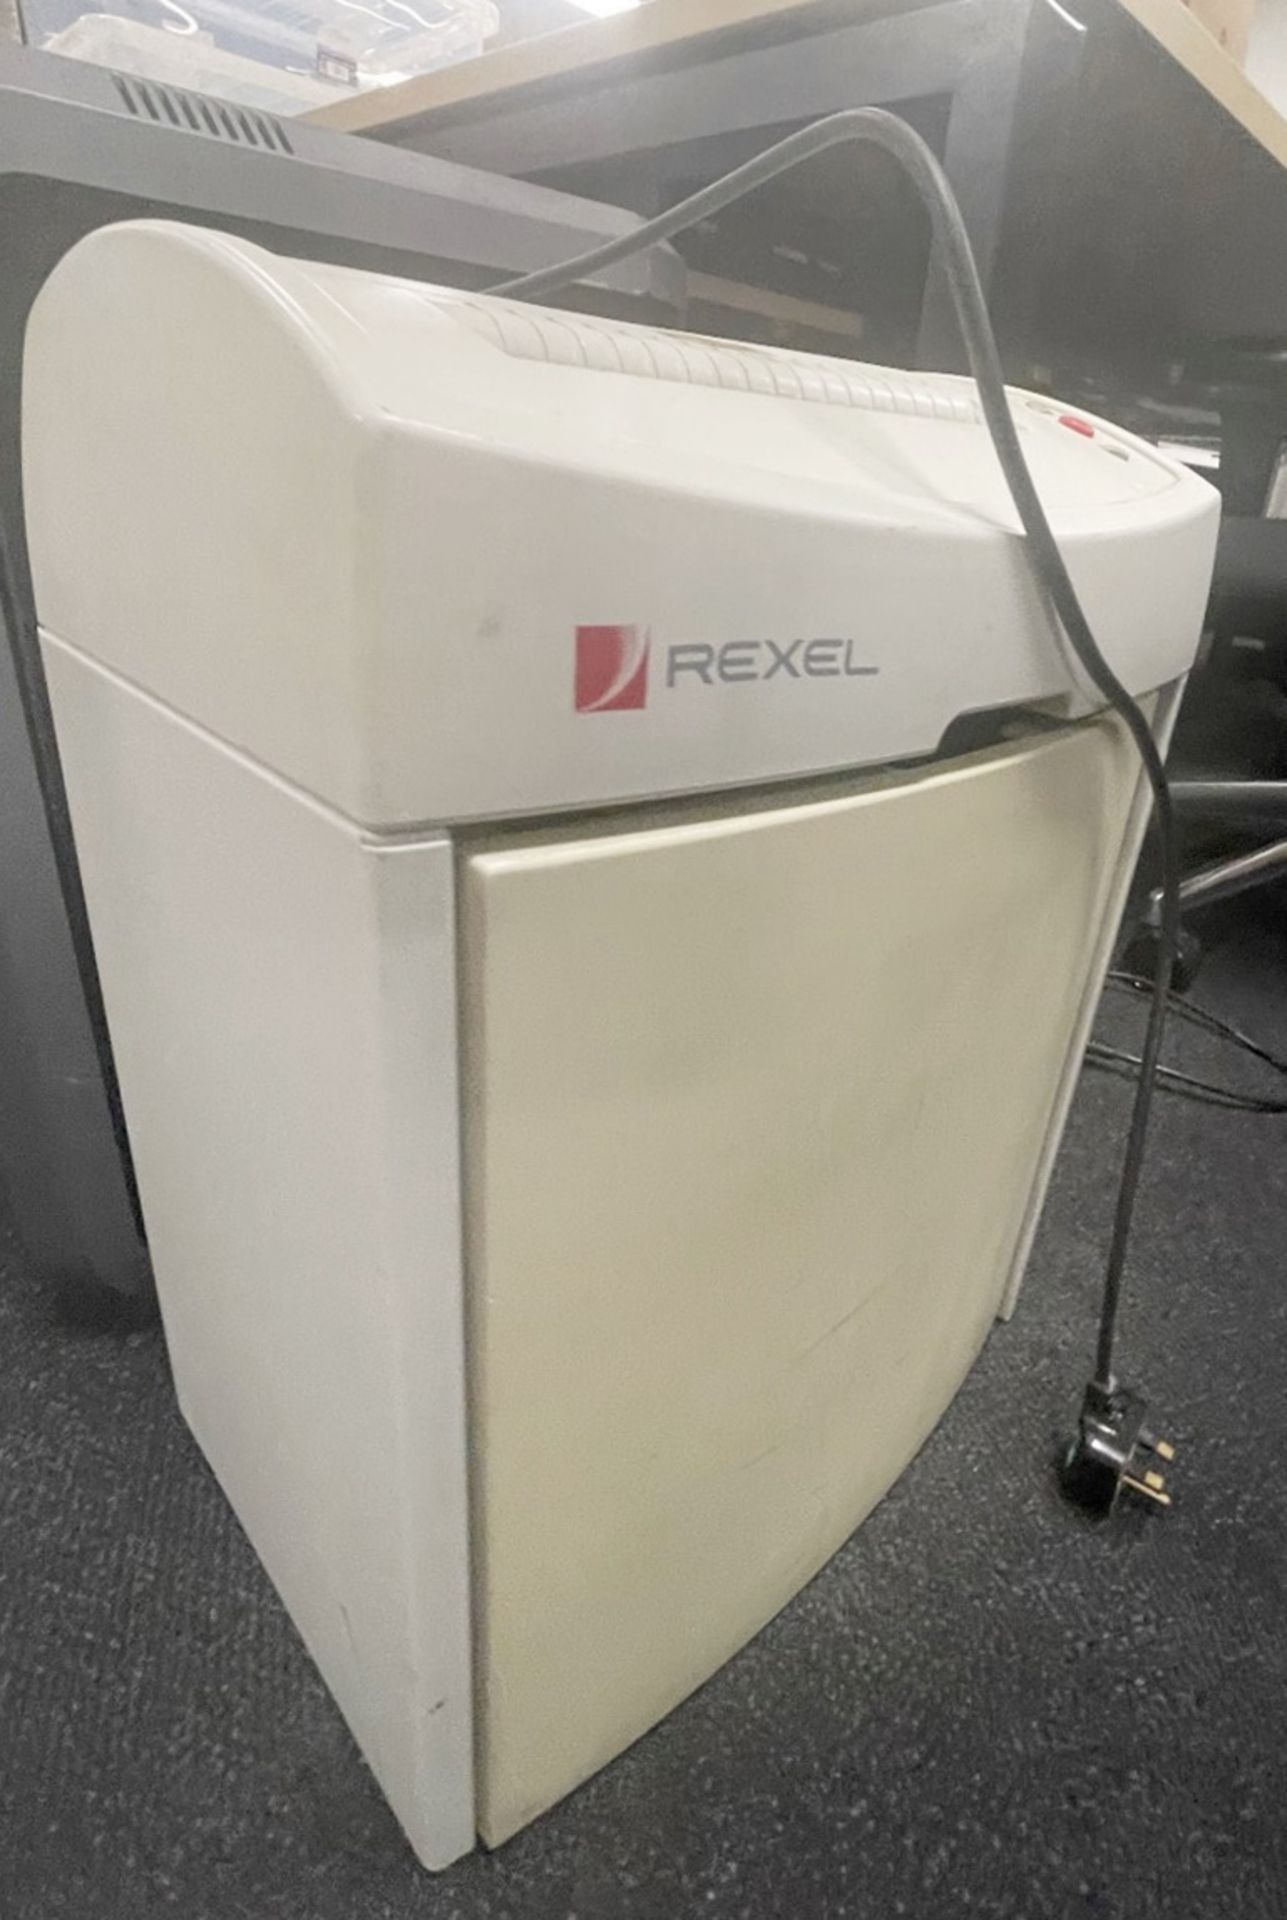 1 x Rexel Shredder - Model 130 Auto - To Be Removed From An Executive Office Environment - CL748 - - Image 3 of 3